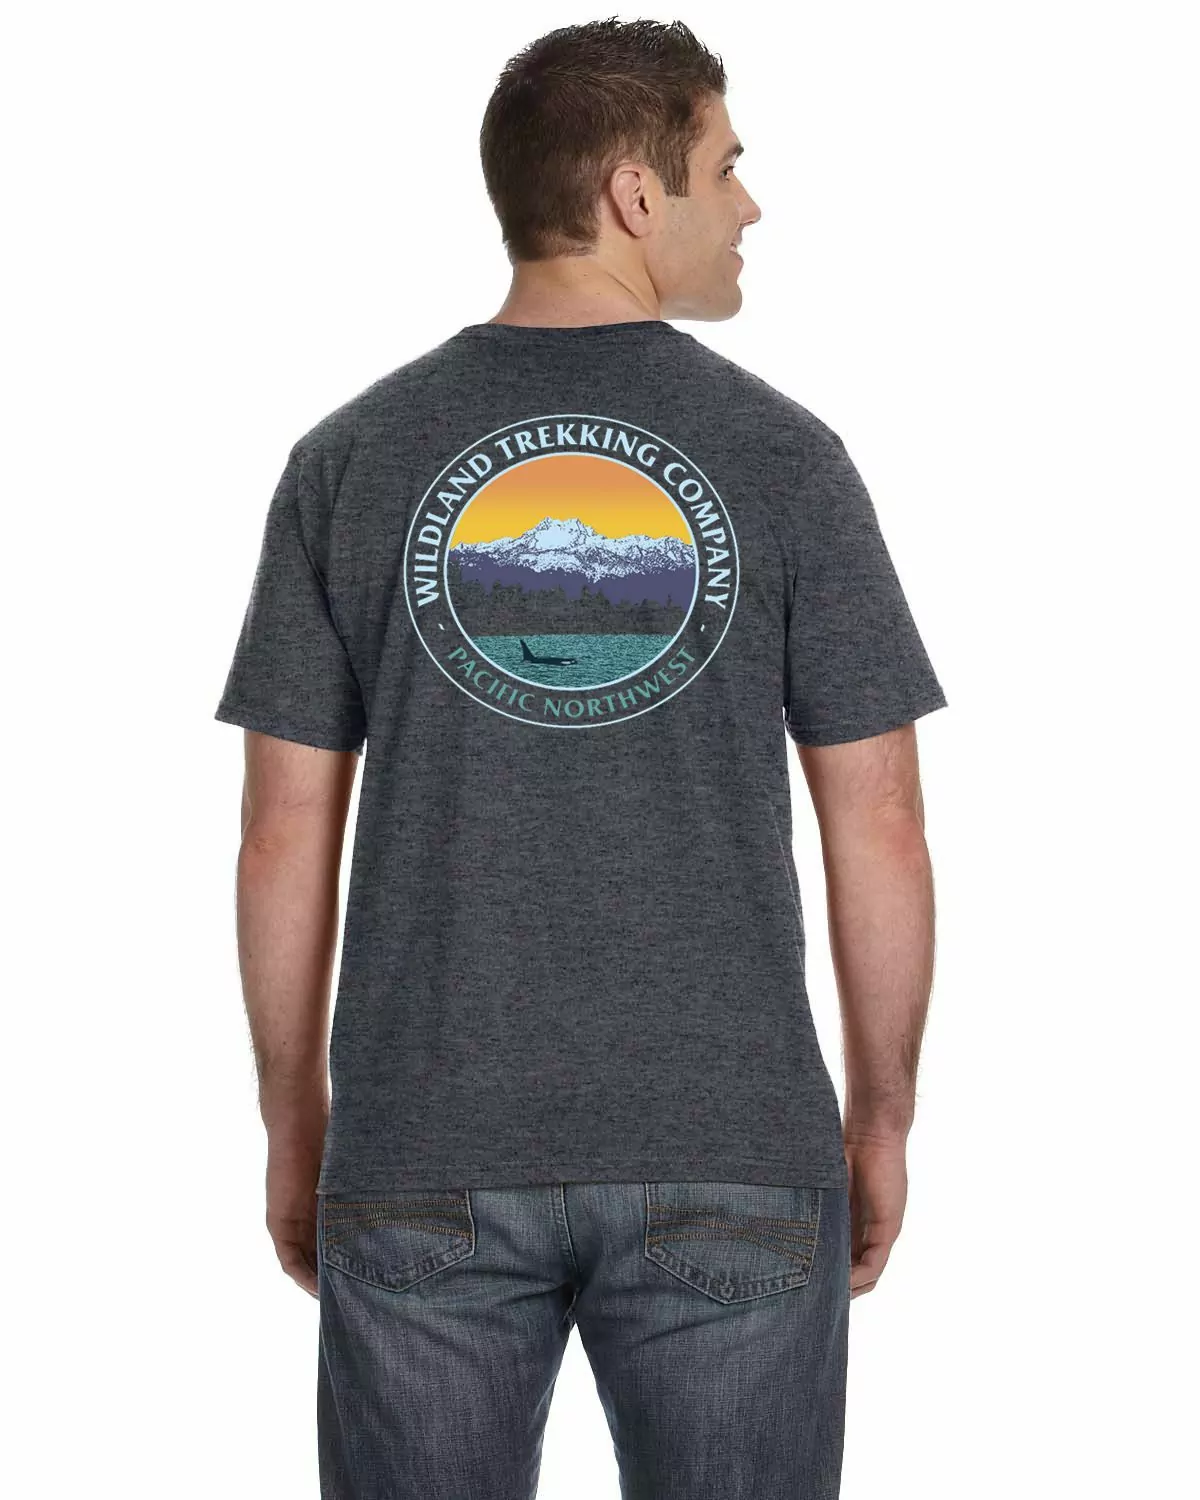 Wildland Shirts and Logo'd Products